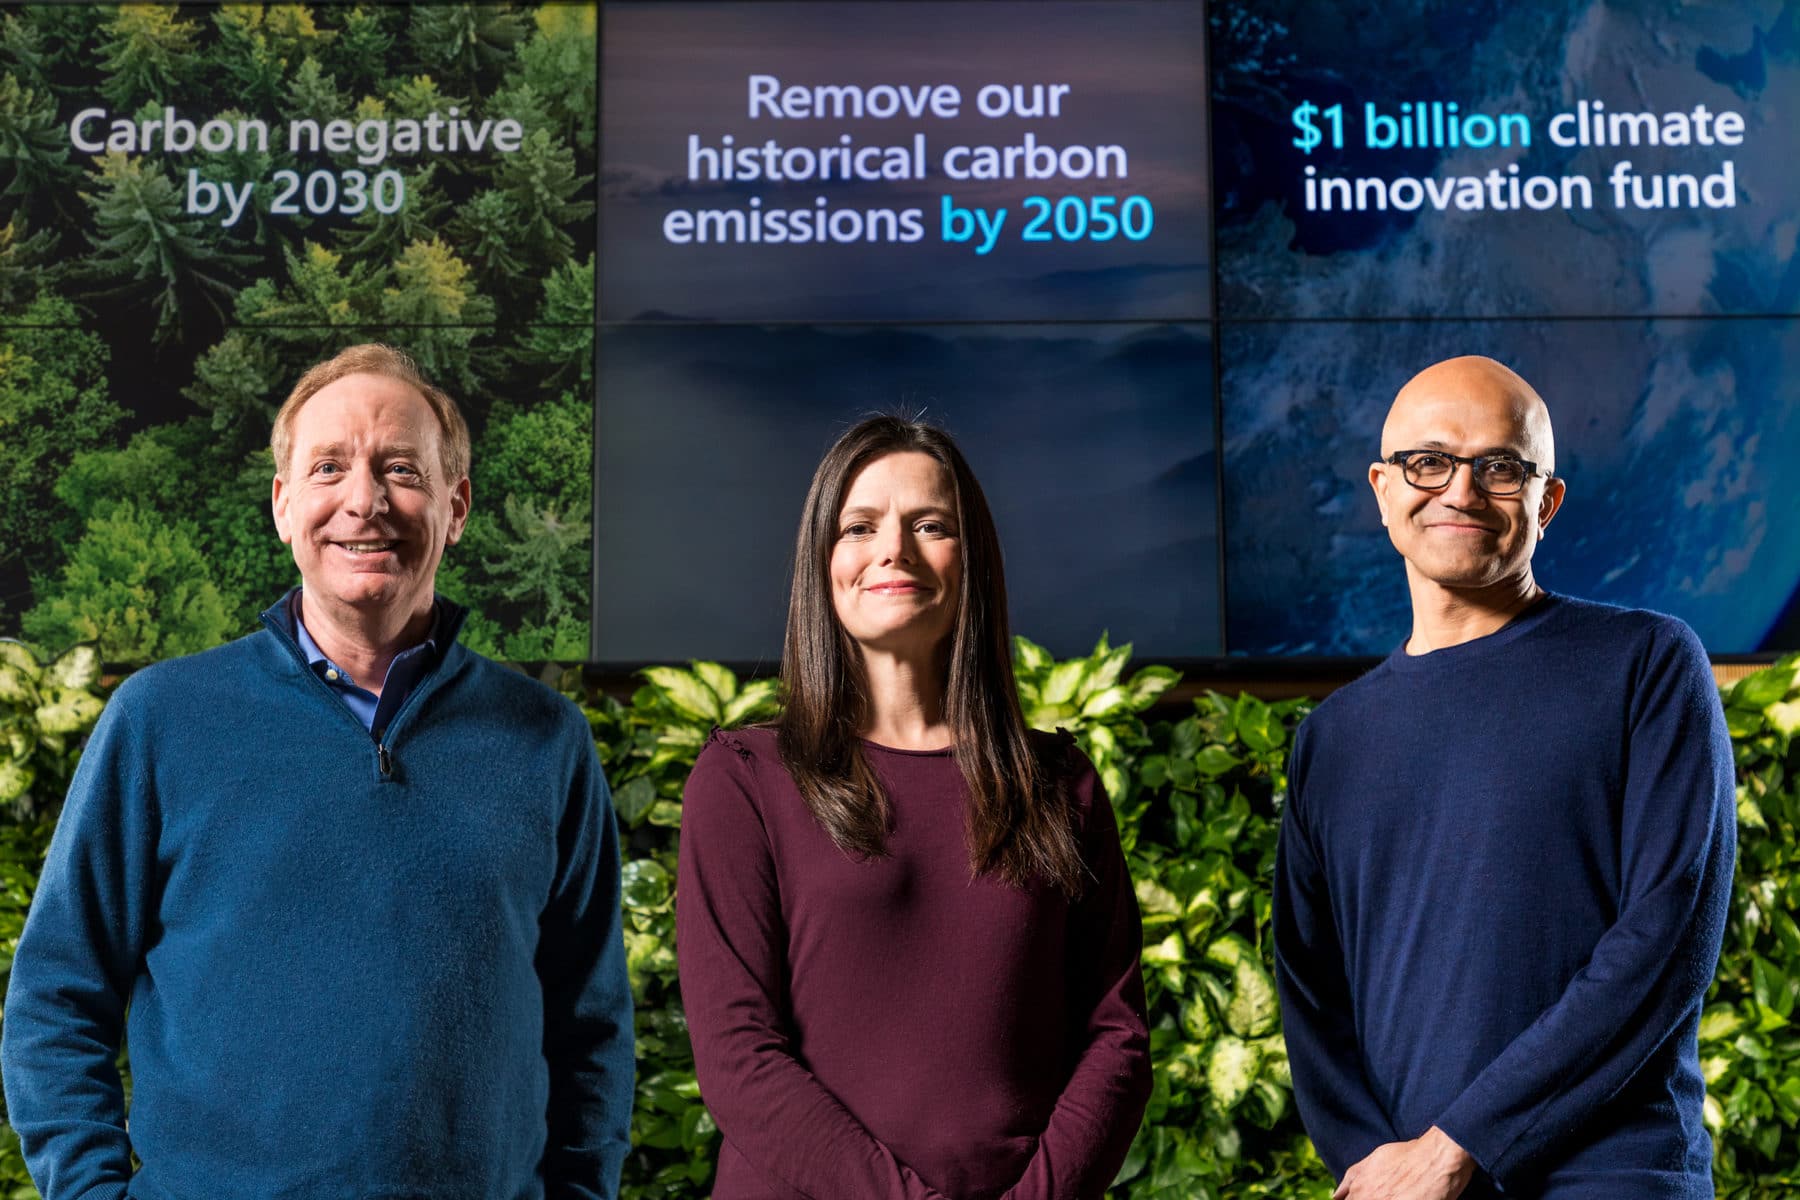 Microsoft announces that it will be negative carbon by 2030 |